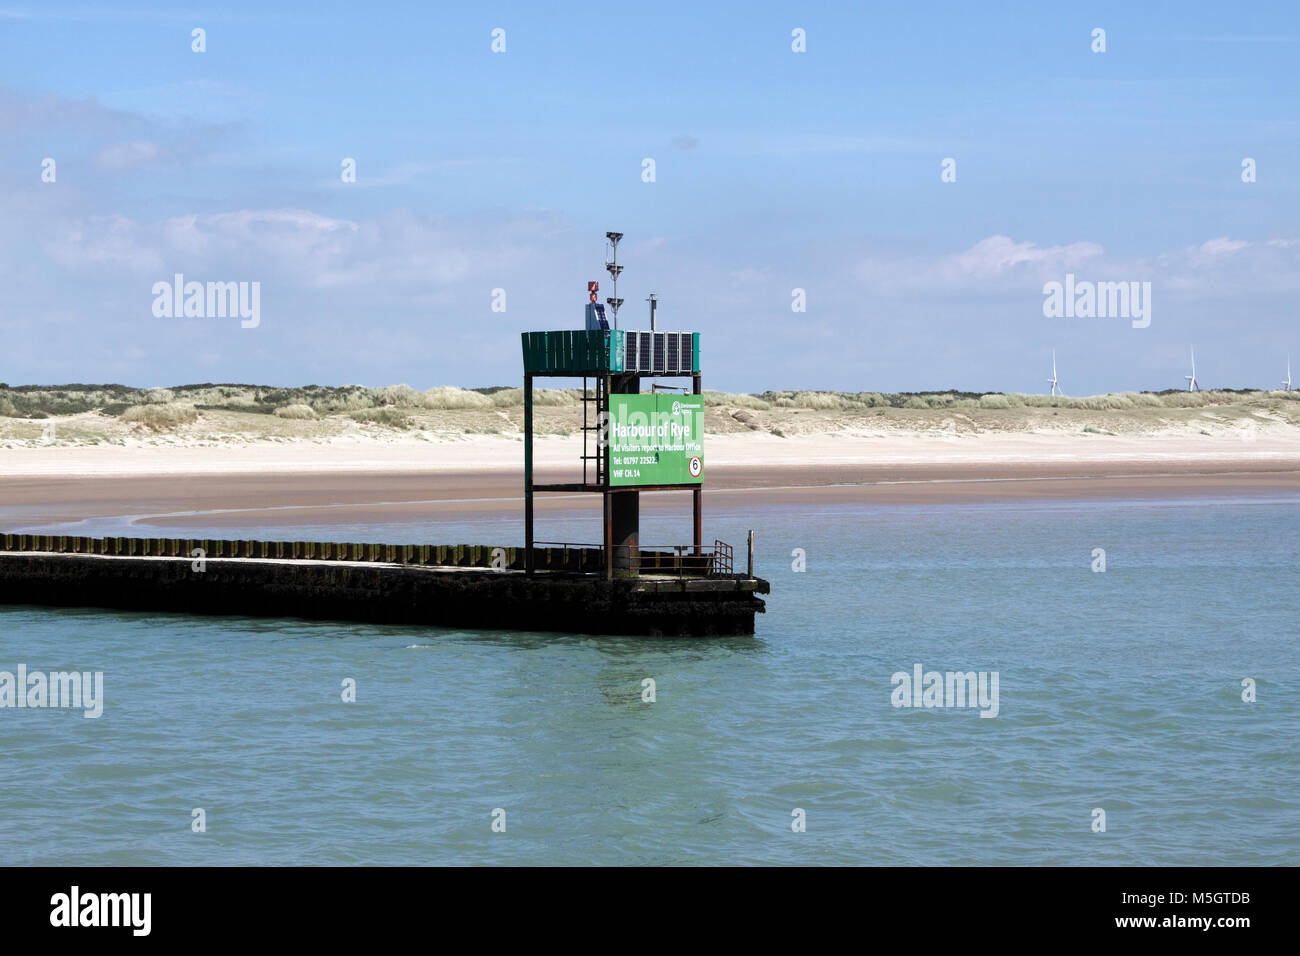 RIVER ROTHER ESTUARY AND ENTRANCE TO RYE HARBOUR. EAST SUSSEX UK. Stock Photo